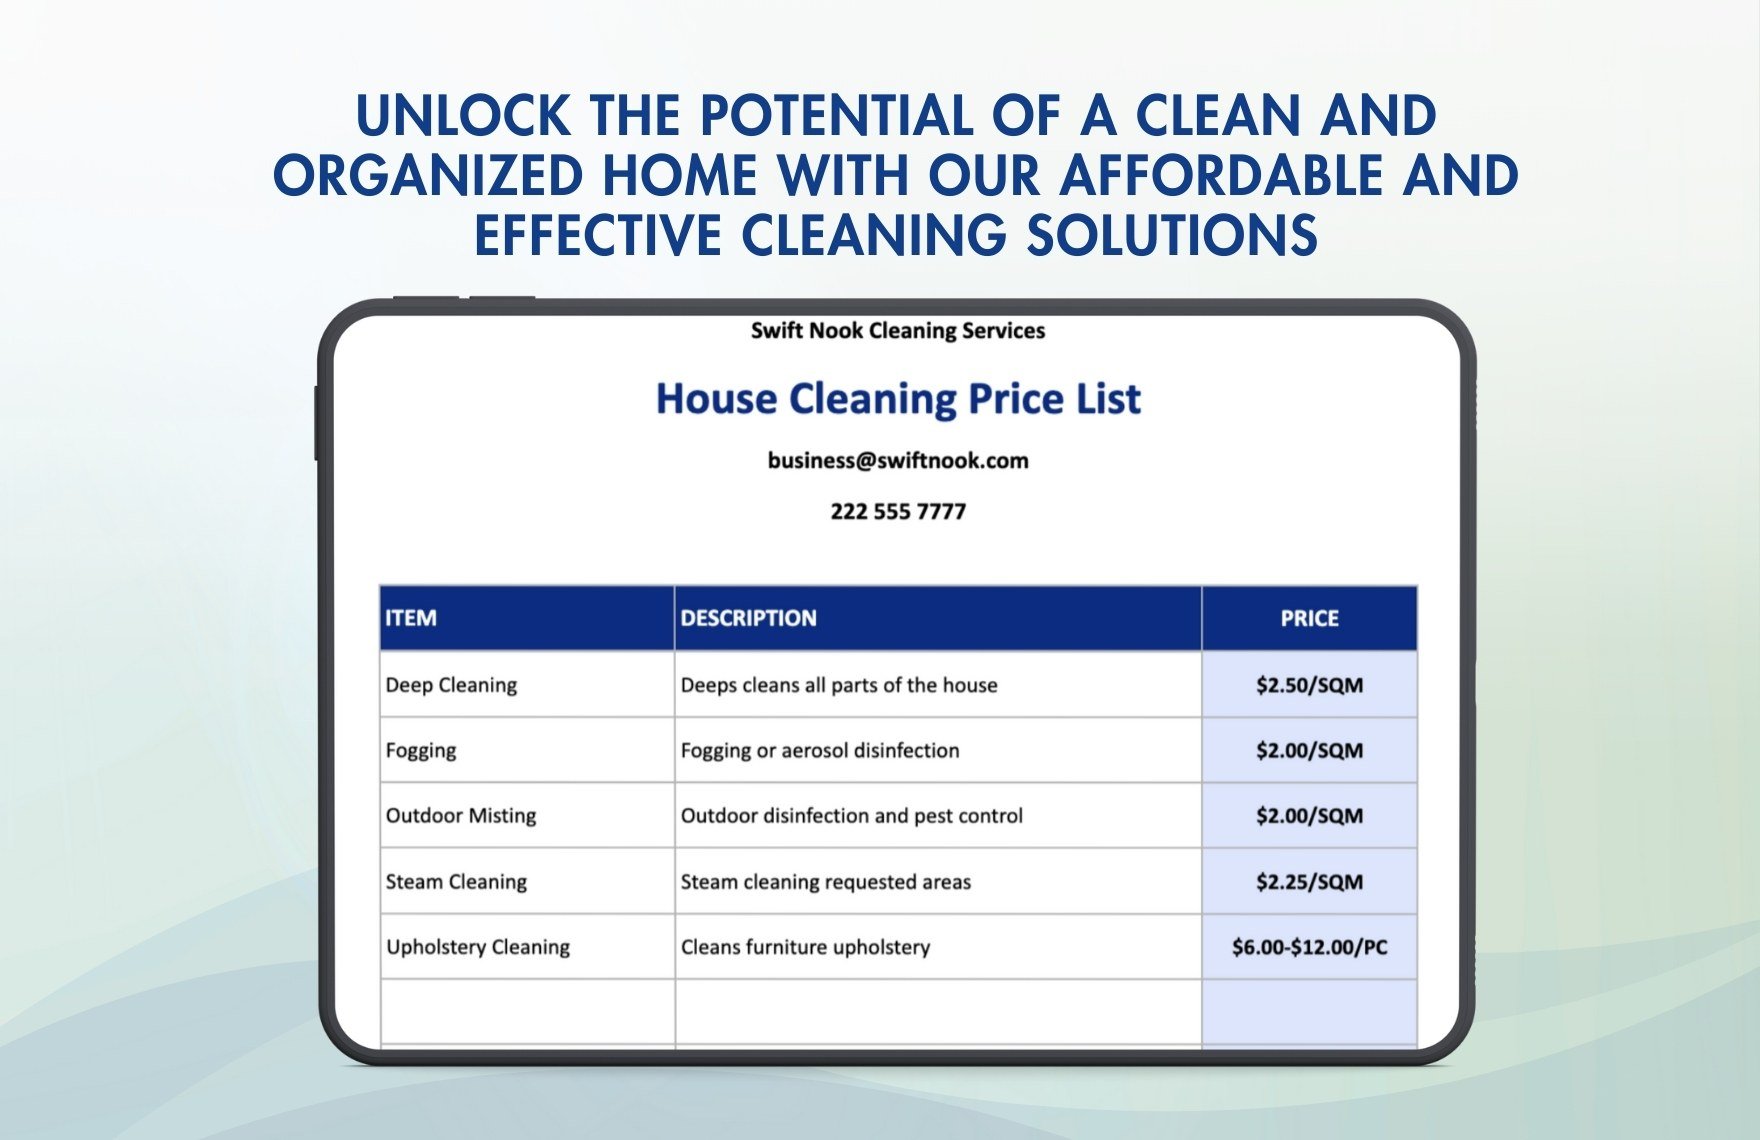 Home Cleaning Services Price List Template